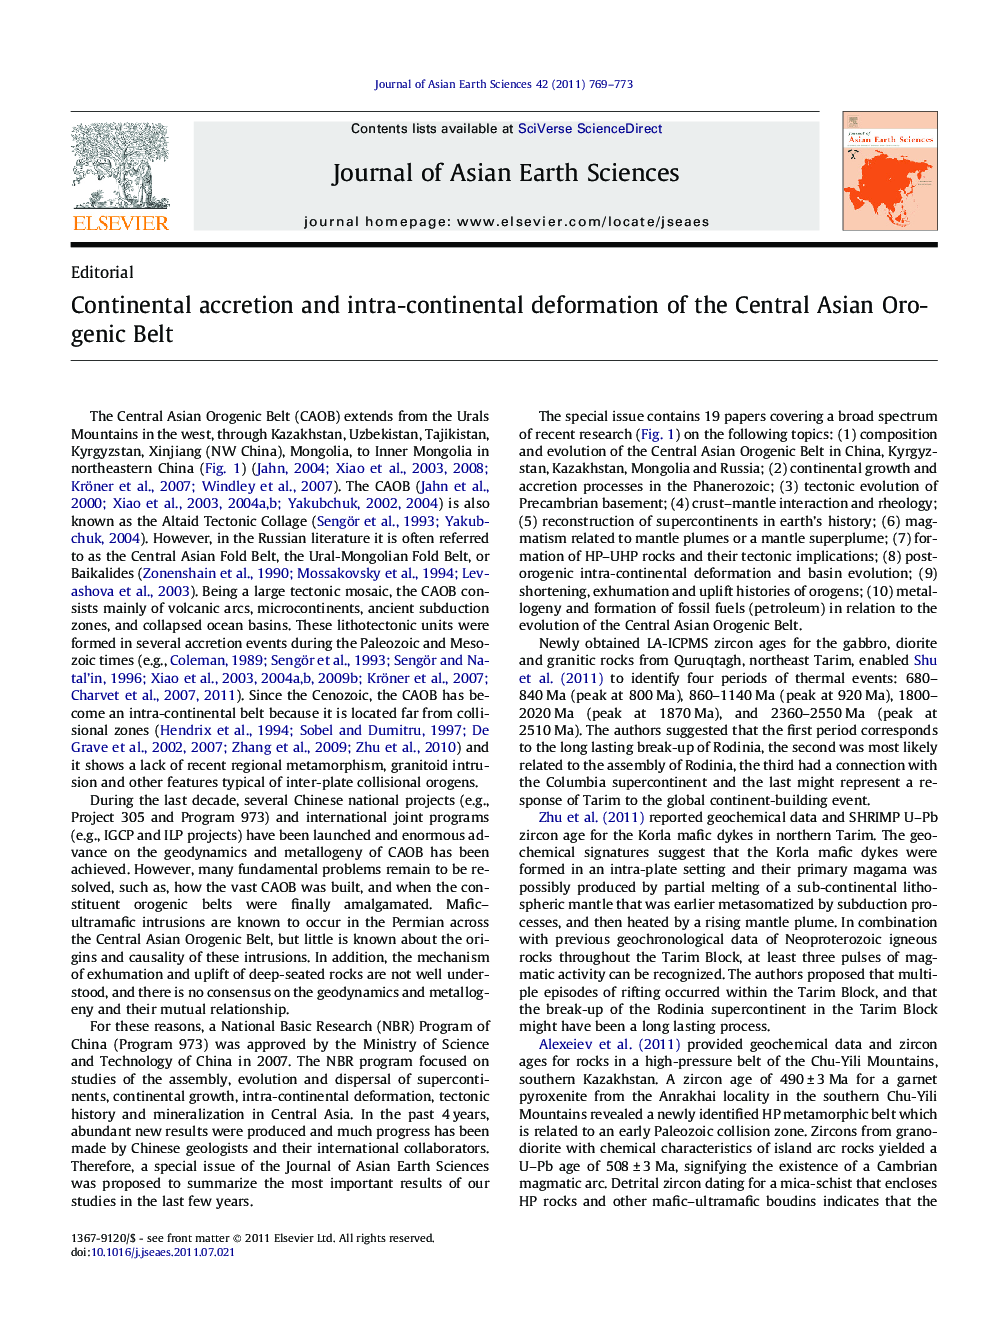 Continental accretion and intra-continental deformation of the Central Asian Orogenic Belt